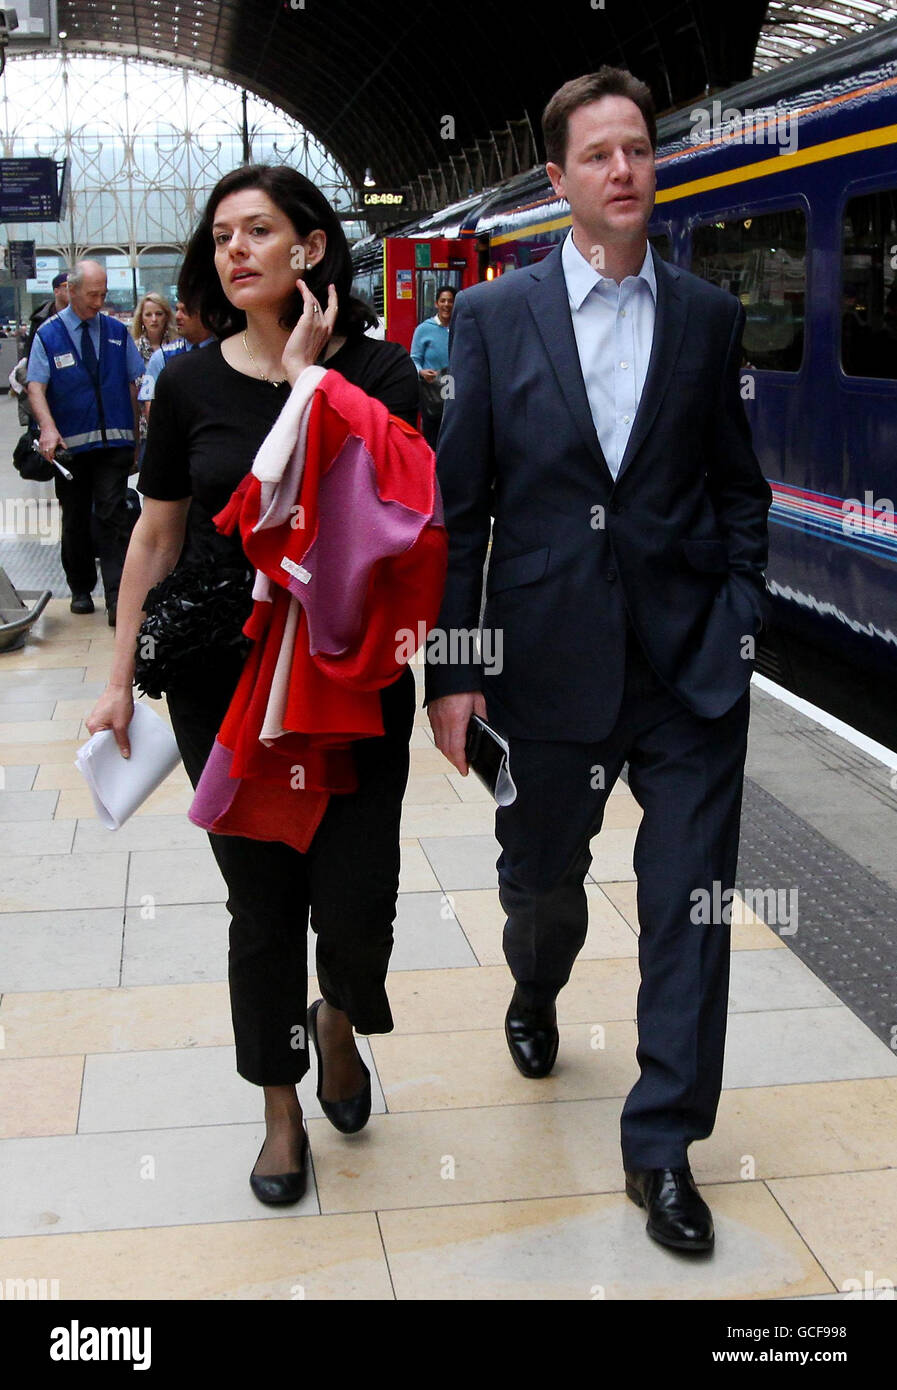 Liberal Democrat Leader Nick Clegg with his wife Miriam Gonzalez Durantez arrive at Paddington Station in London to board a train bound for a General Election Campaign visit to Wells. Stock Photo